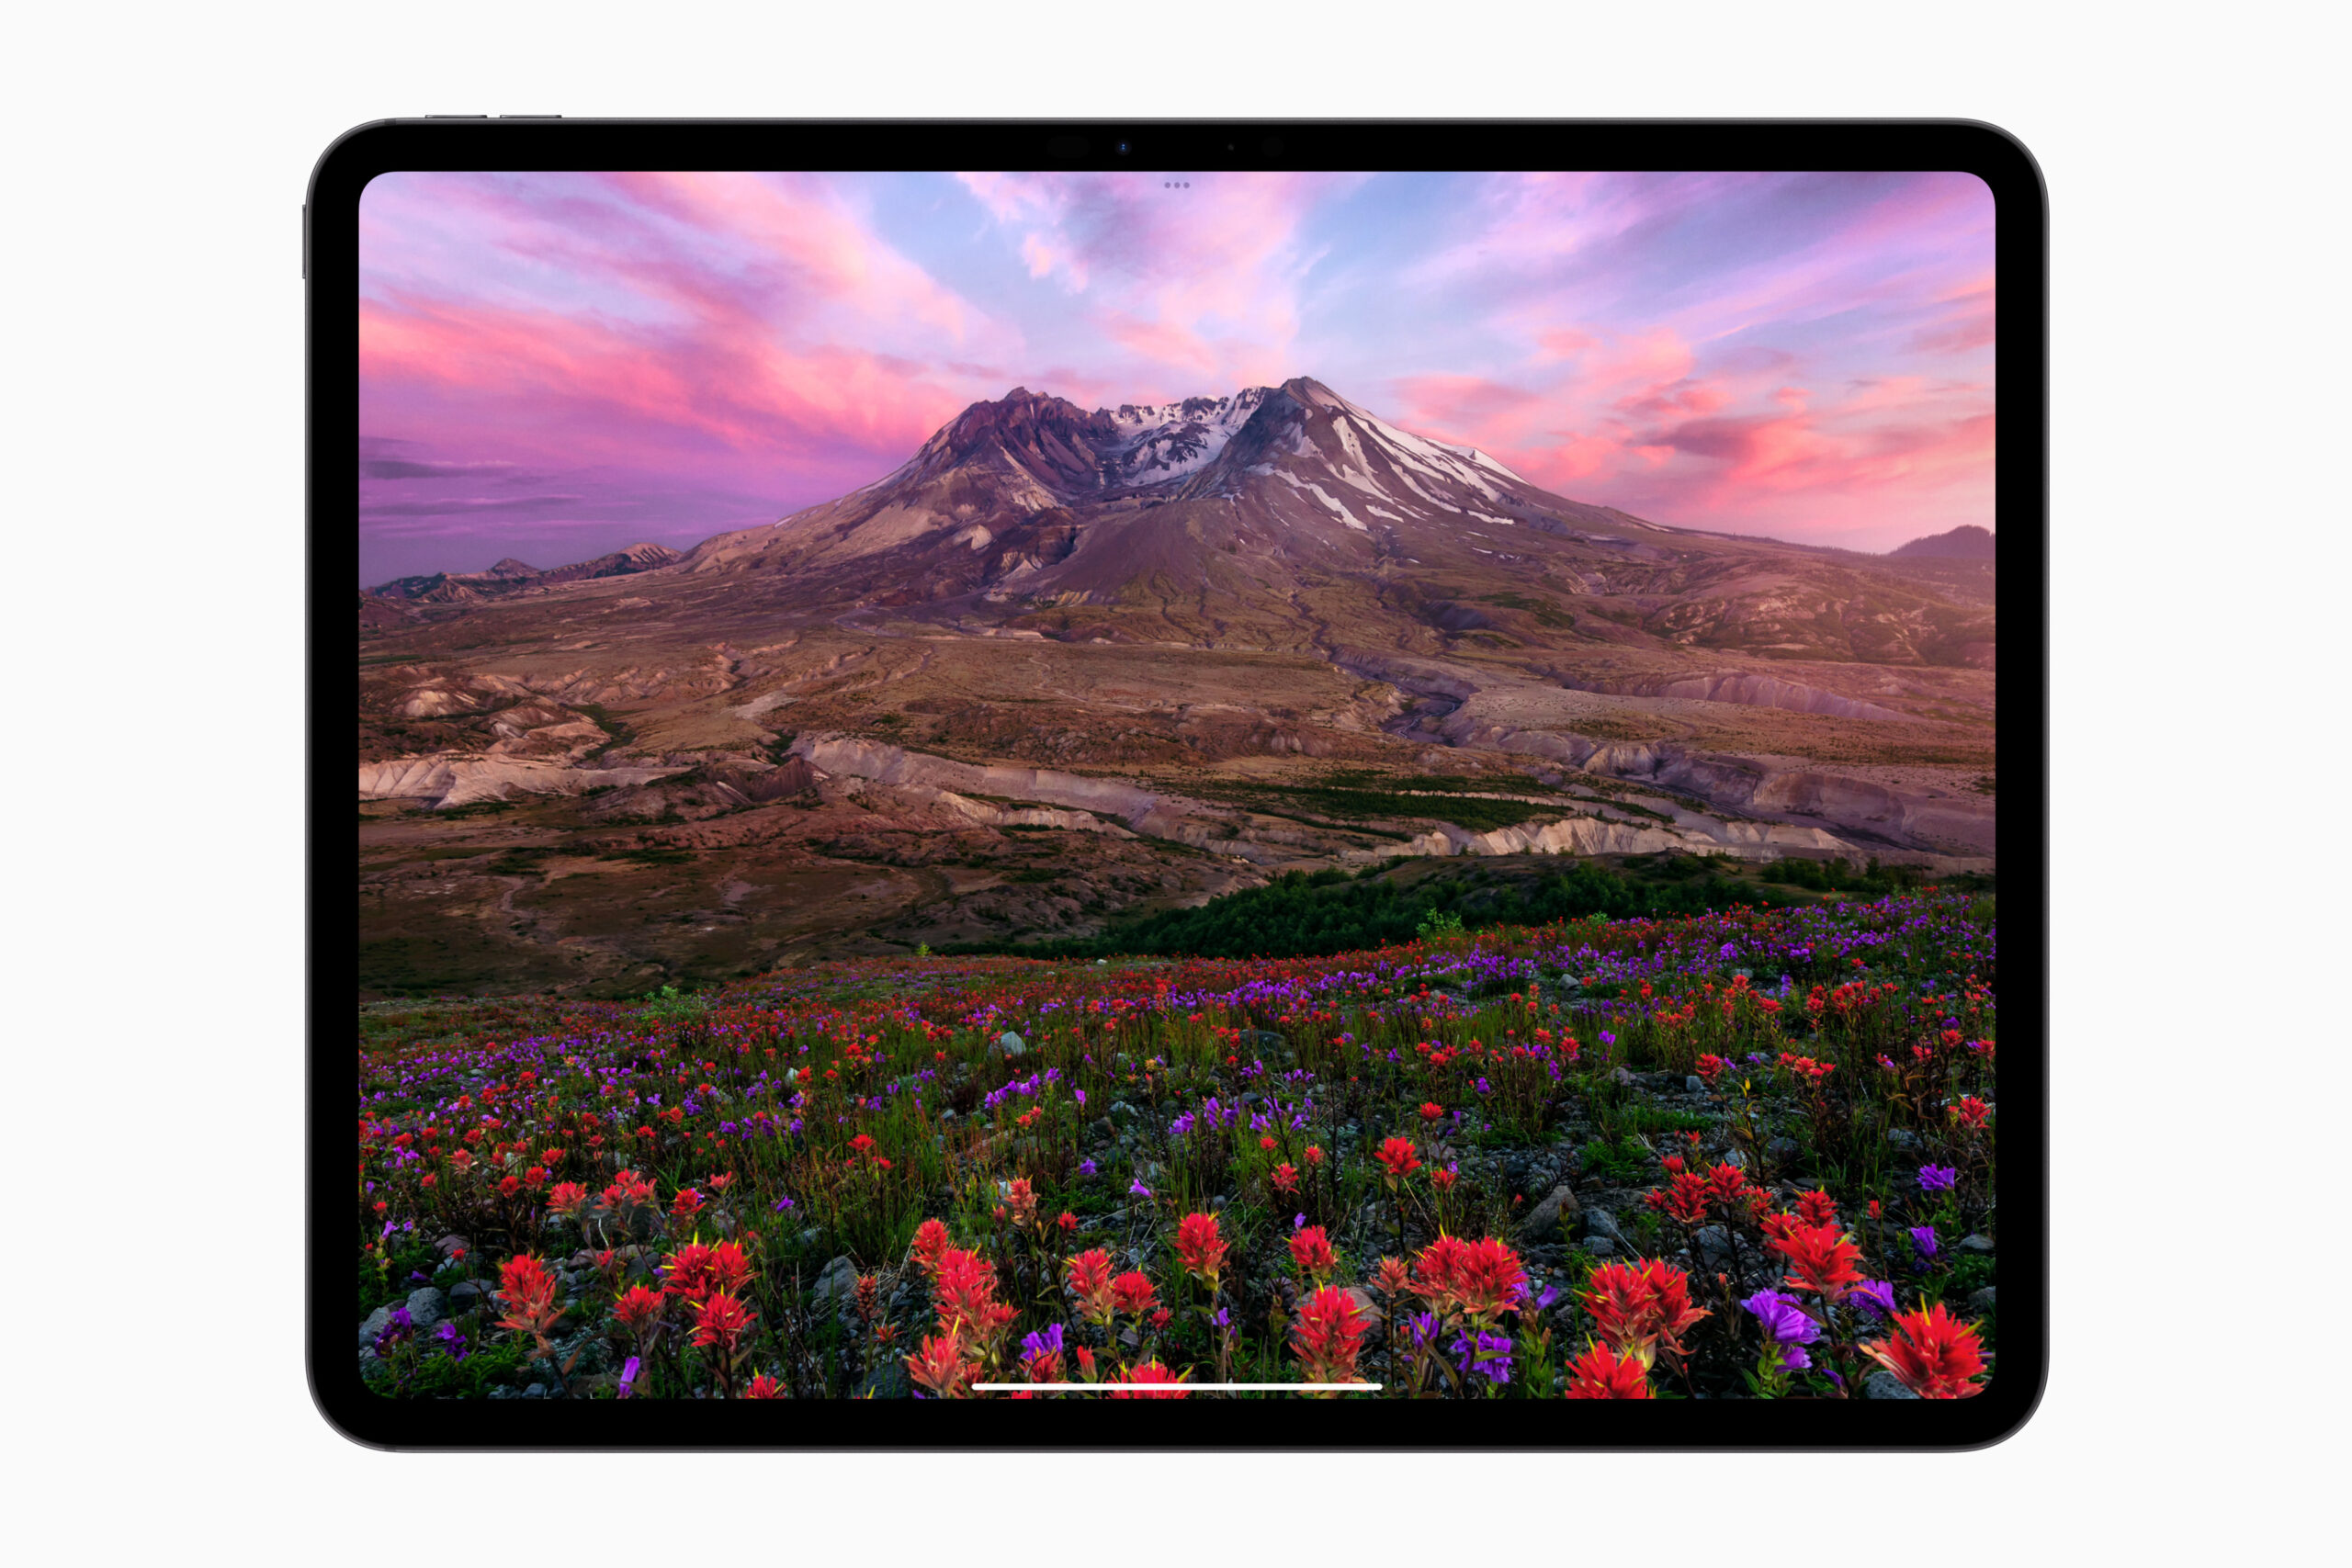 A photo of a mountain and field of flowers pulled up on the new M4 iPad Pro.